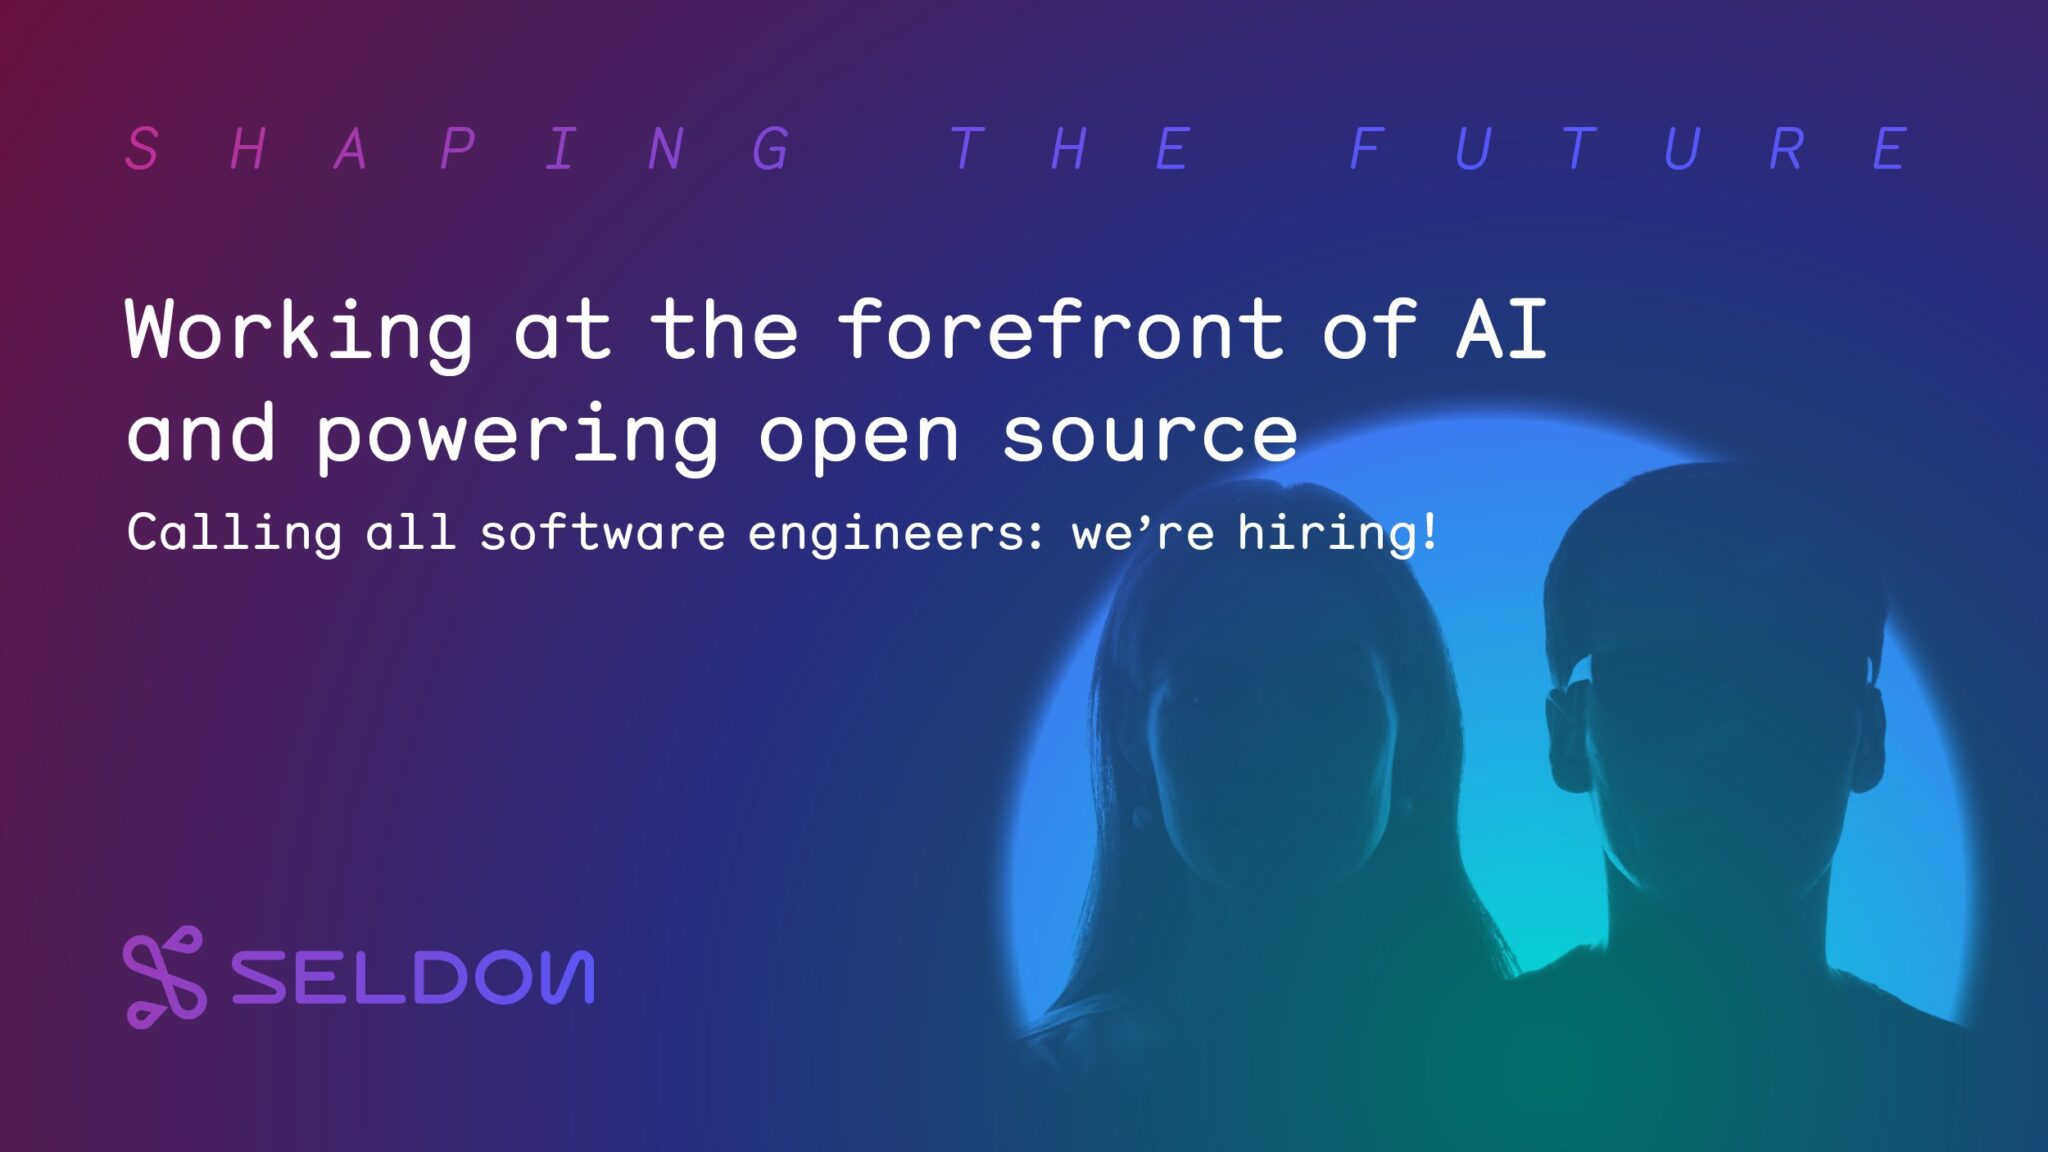 Working at the forefront of AI and powering open source